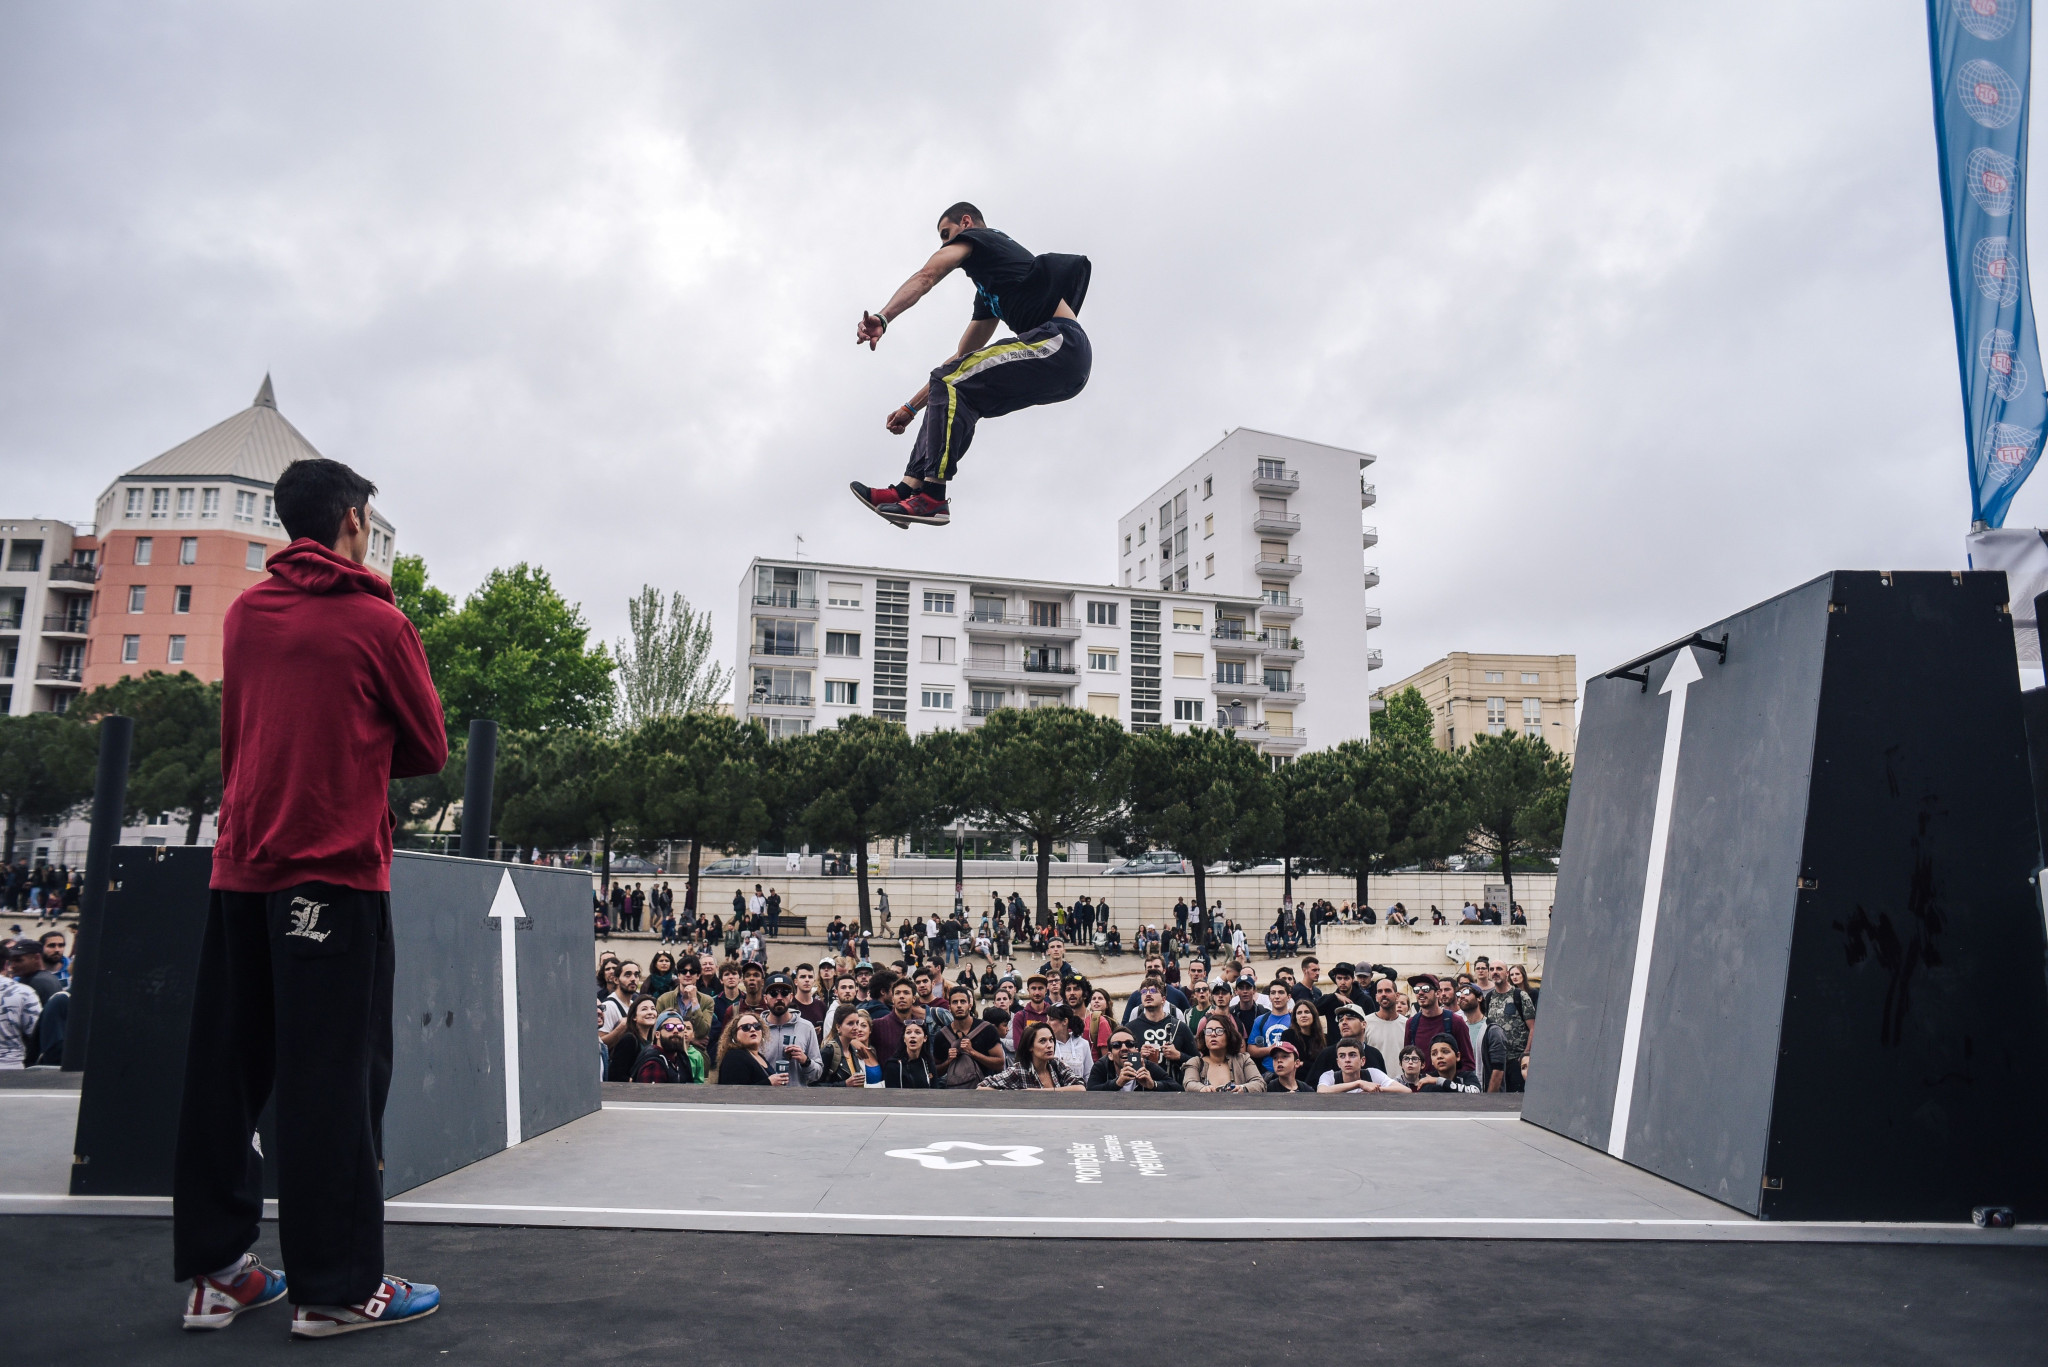 The first FIG Parkour World Cup took place at FISE Montpellier in 2018 and is the focus for Morinari Watanabe ©FISE